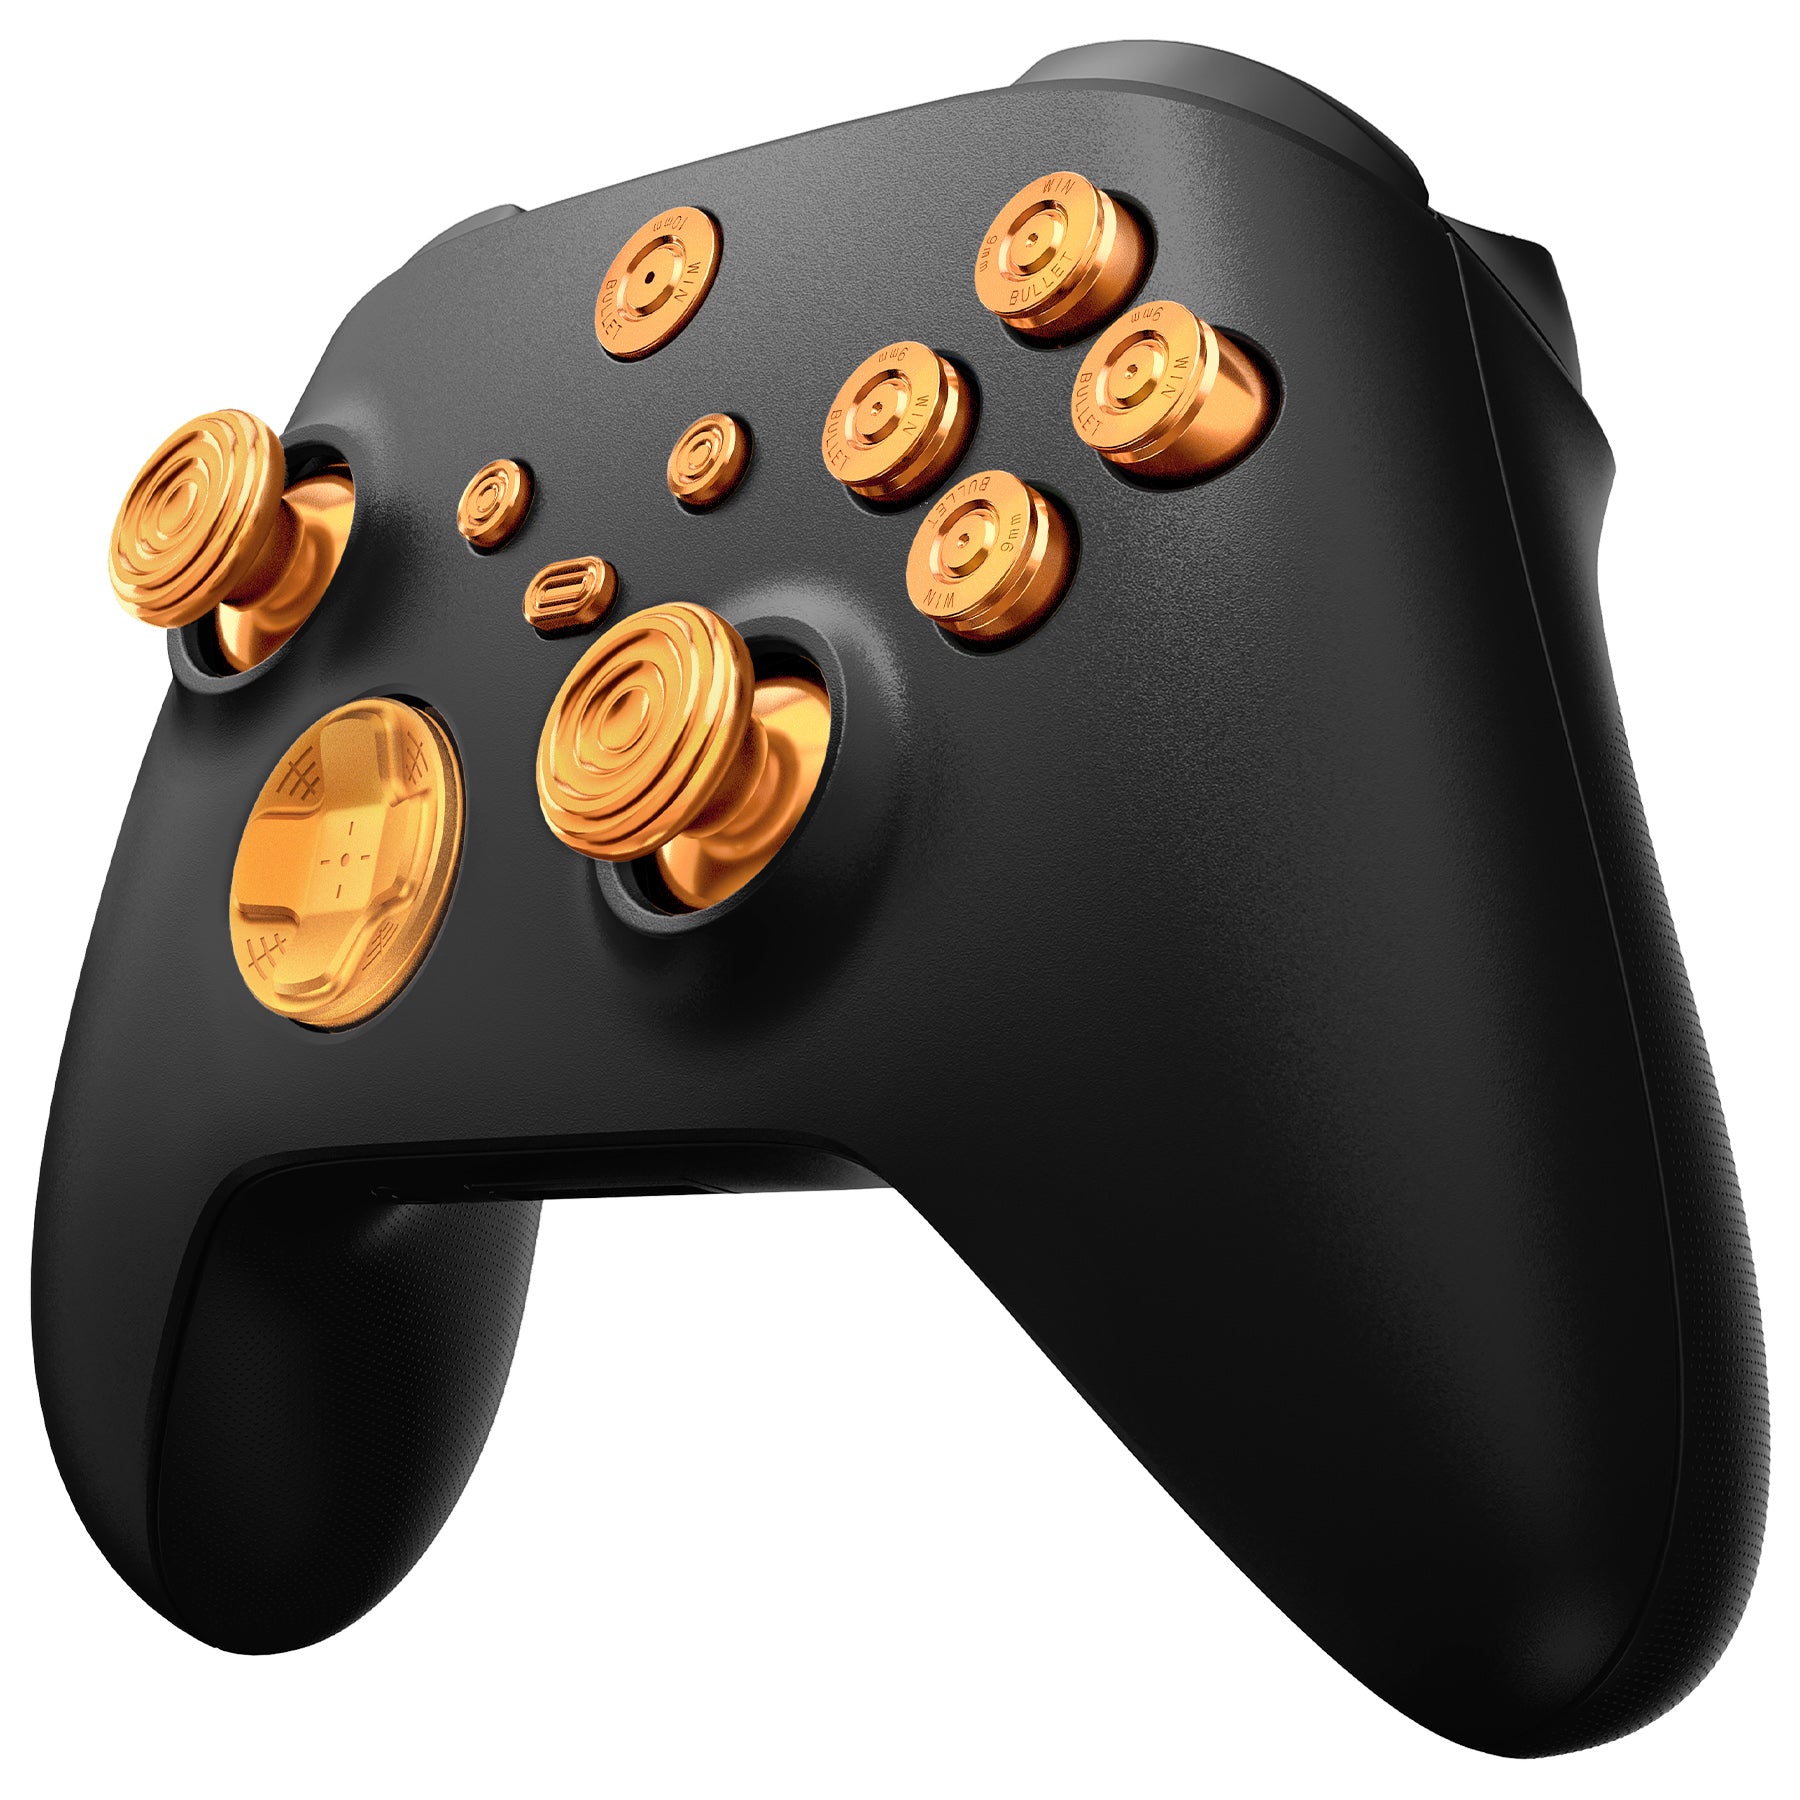 eXtremeRate 11 in 1 Custom Gold Metal Buttons for Xbox Series X/S Controller, Aluminum Alloy Dpad Start Back Share Button, Replacement Thumbsticks